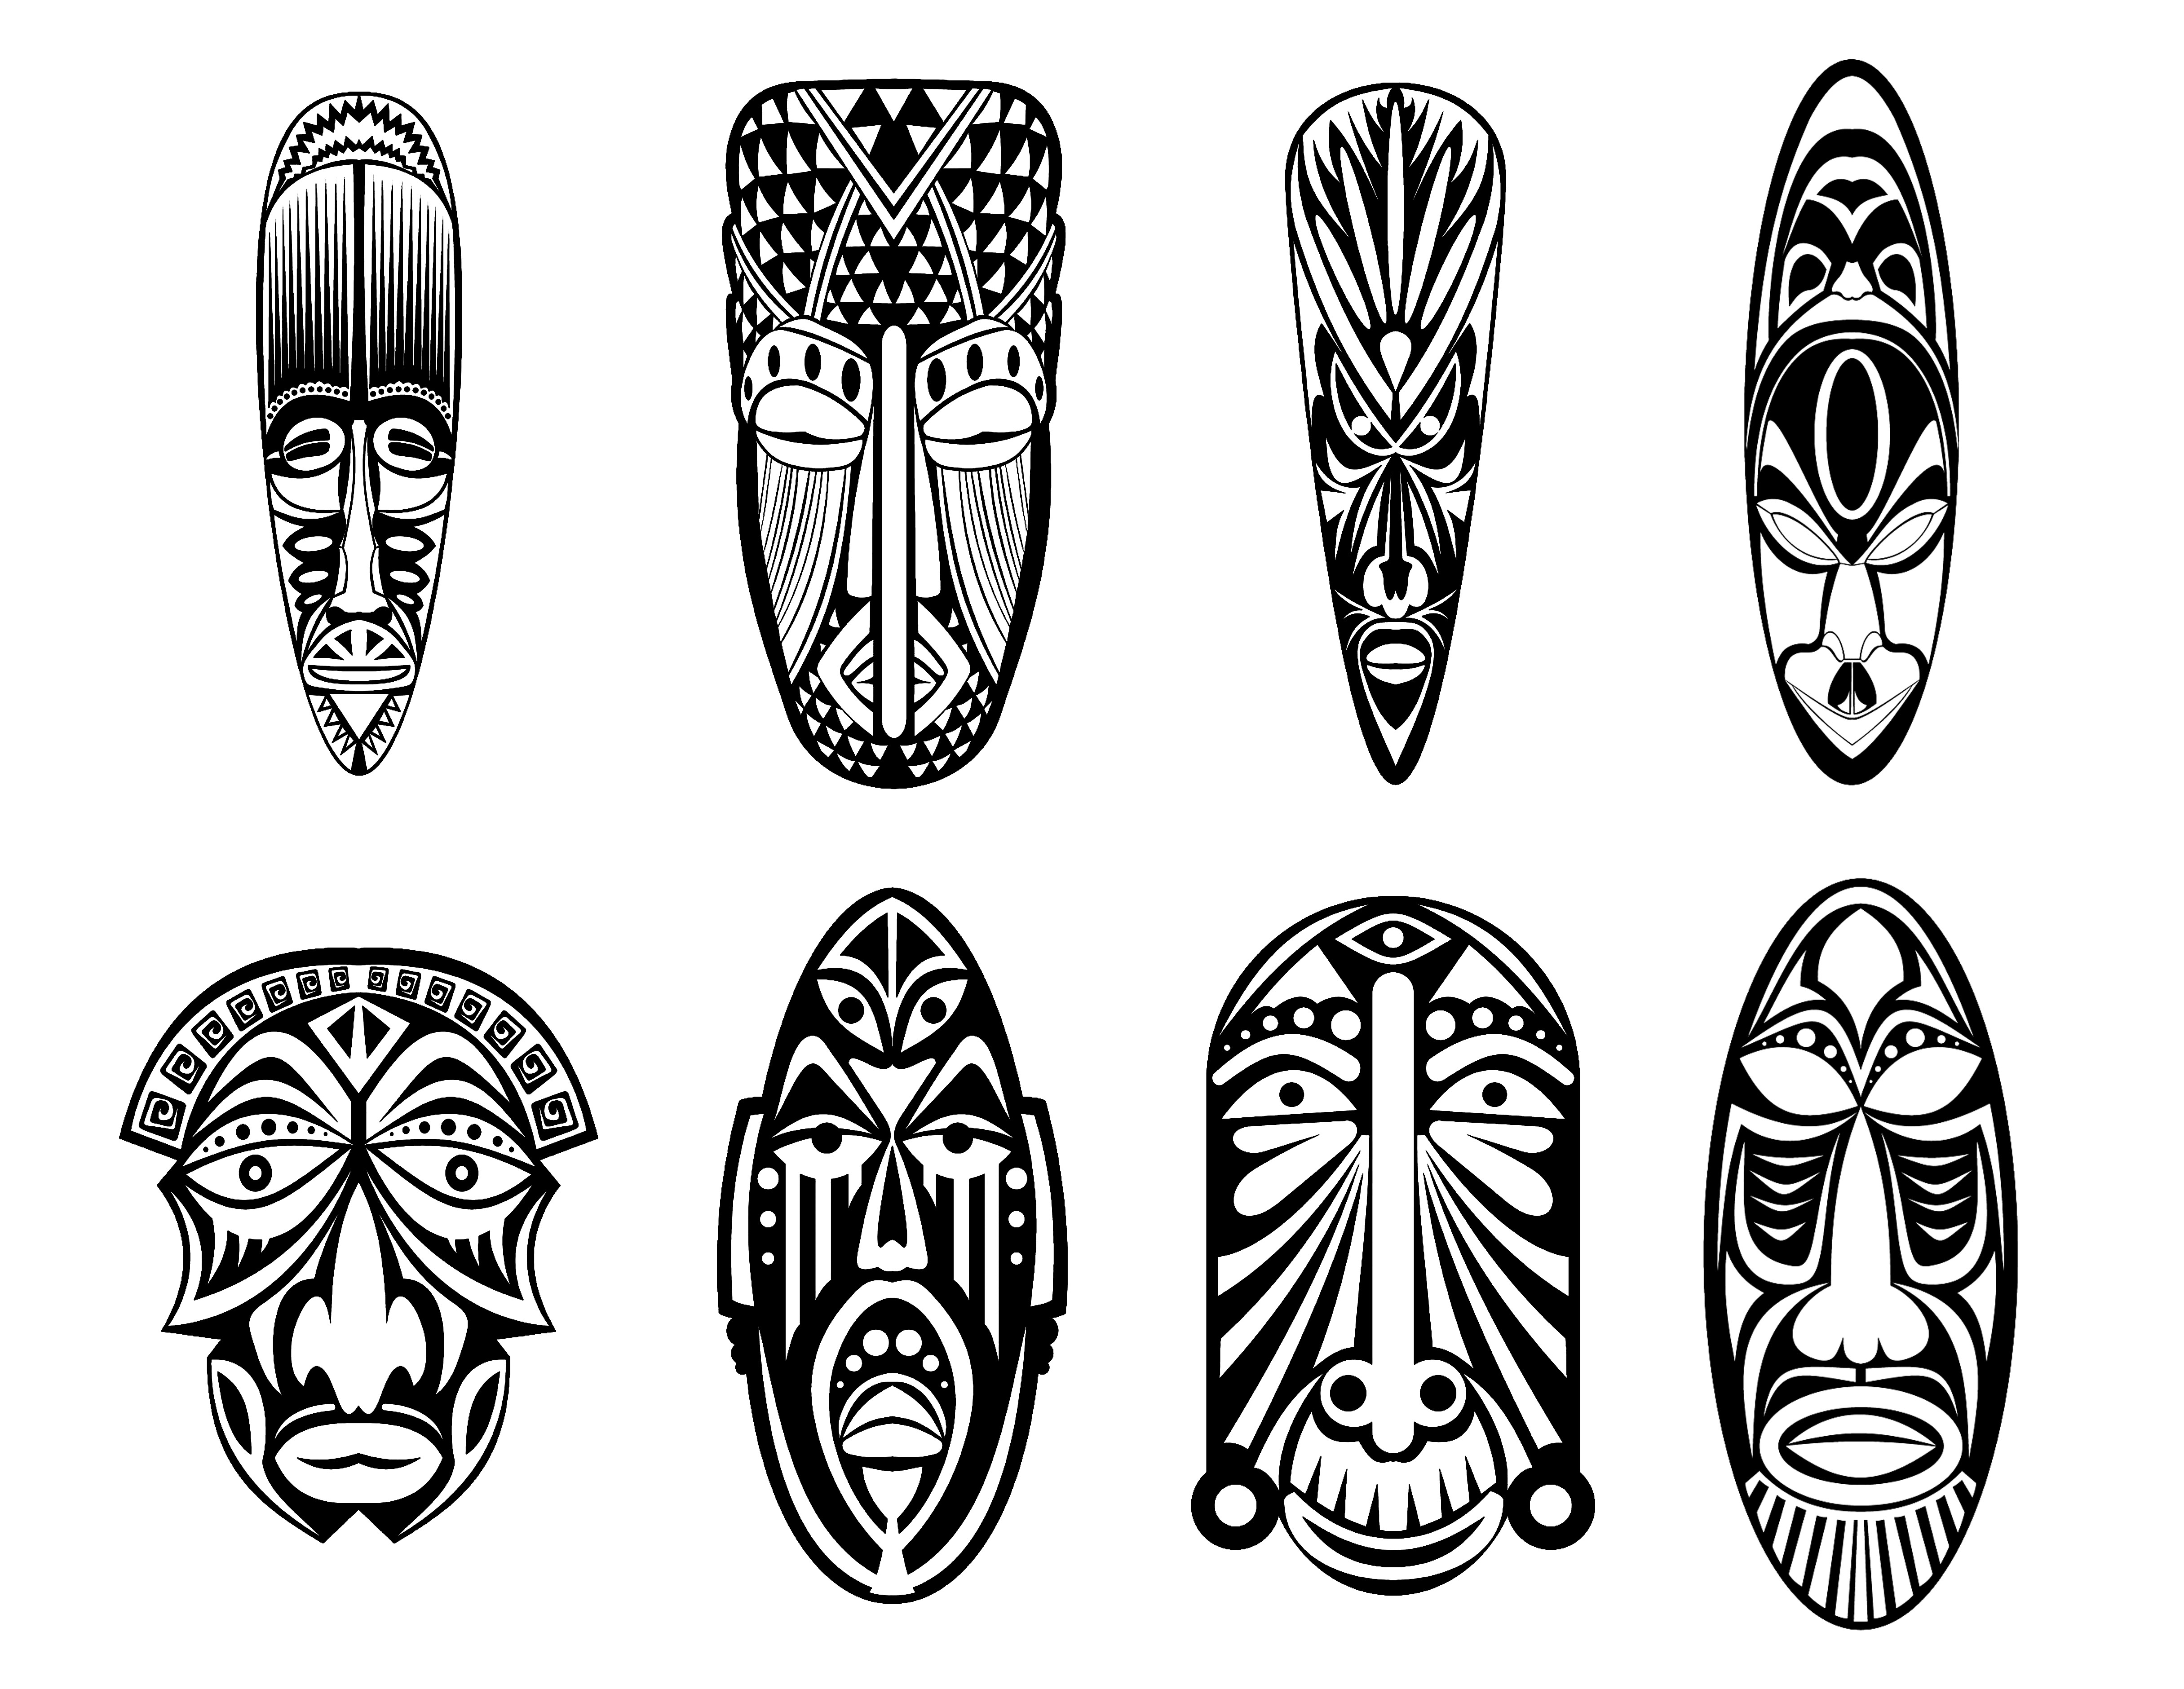 12 different African masks to color